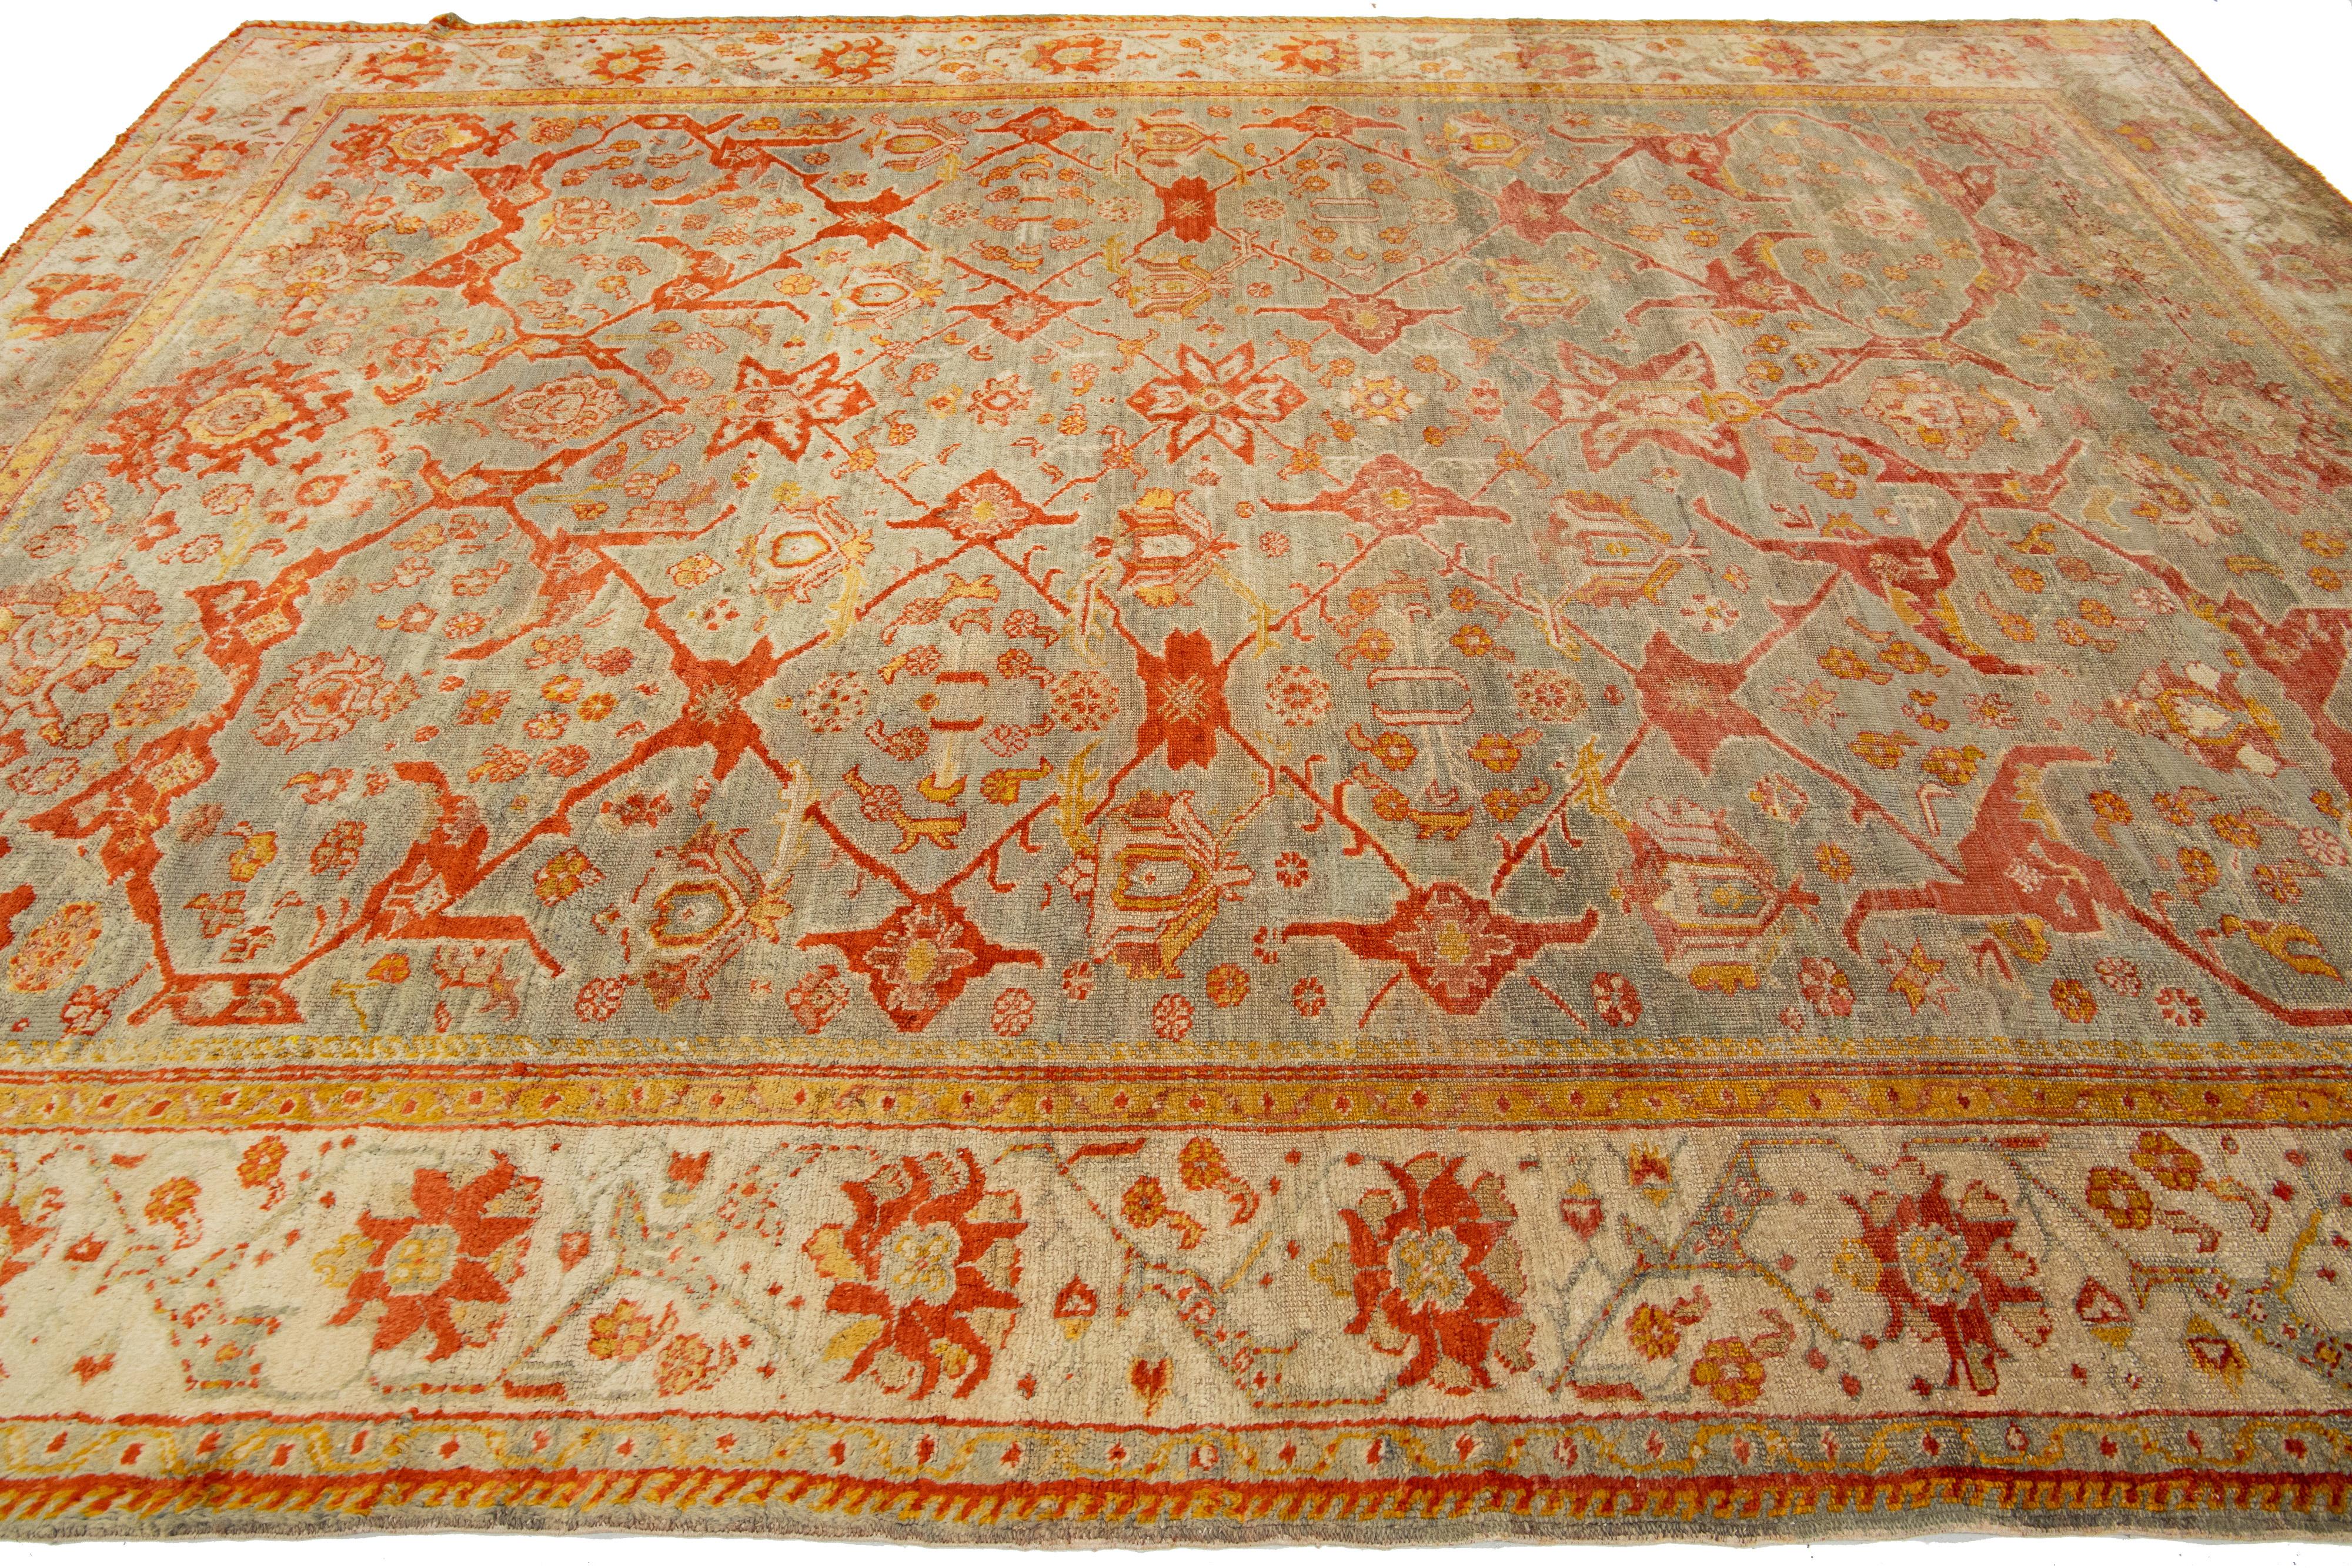 Turkish Oushak Antique Wool Rug Handmade Featuring a Floral Pattern In Rust  In Excellent Condition For Sale In Norwalk, CT